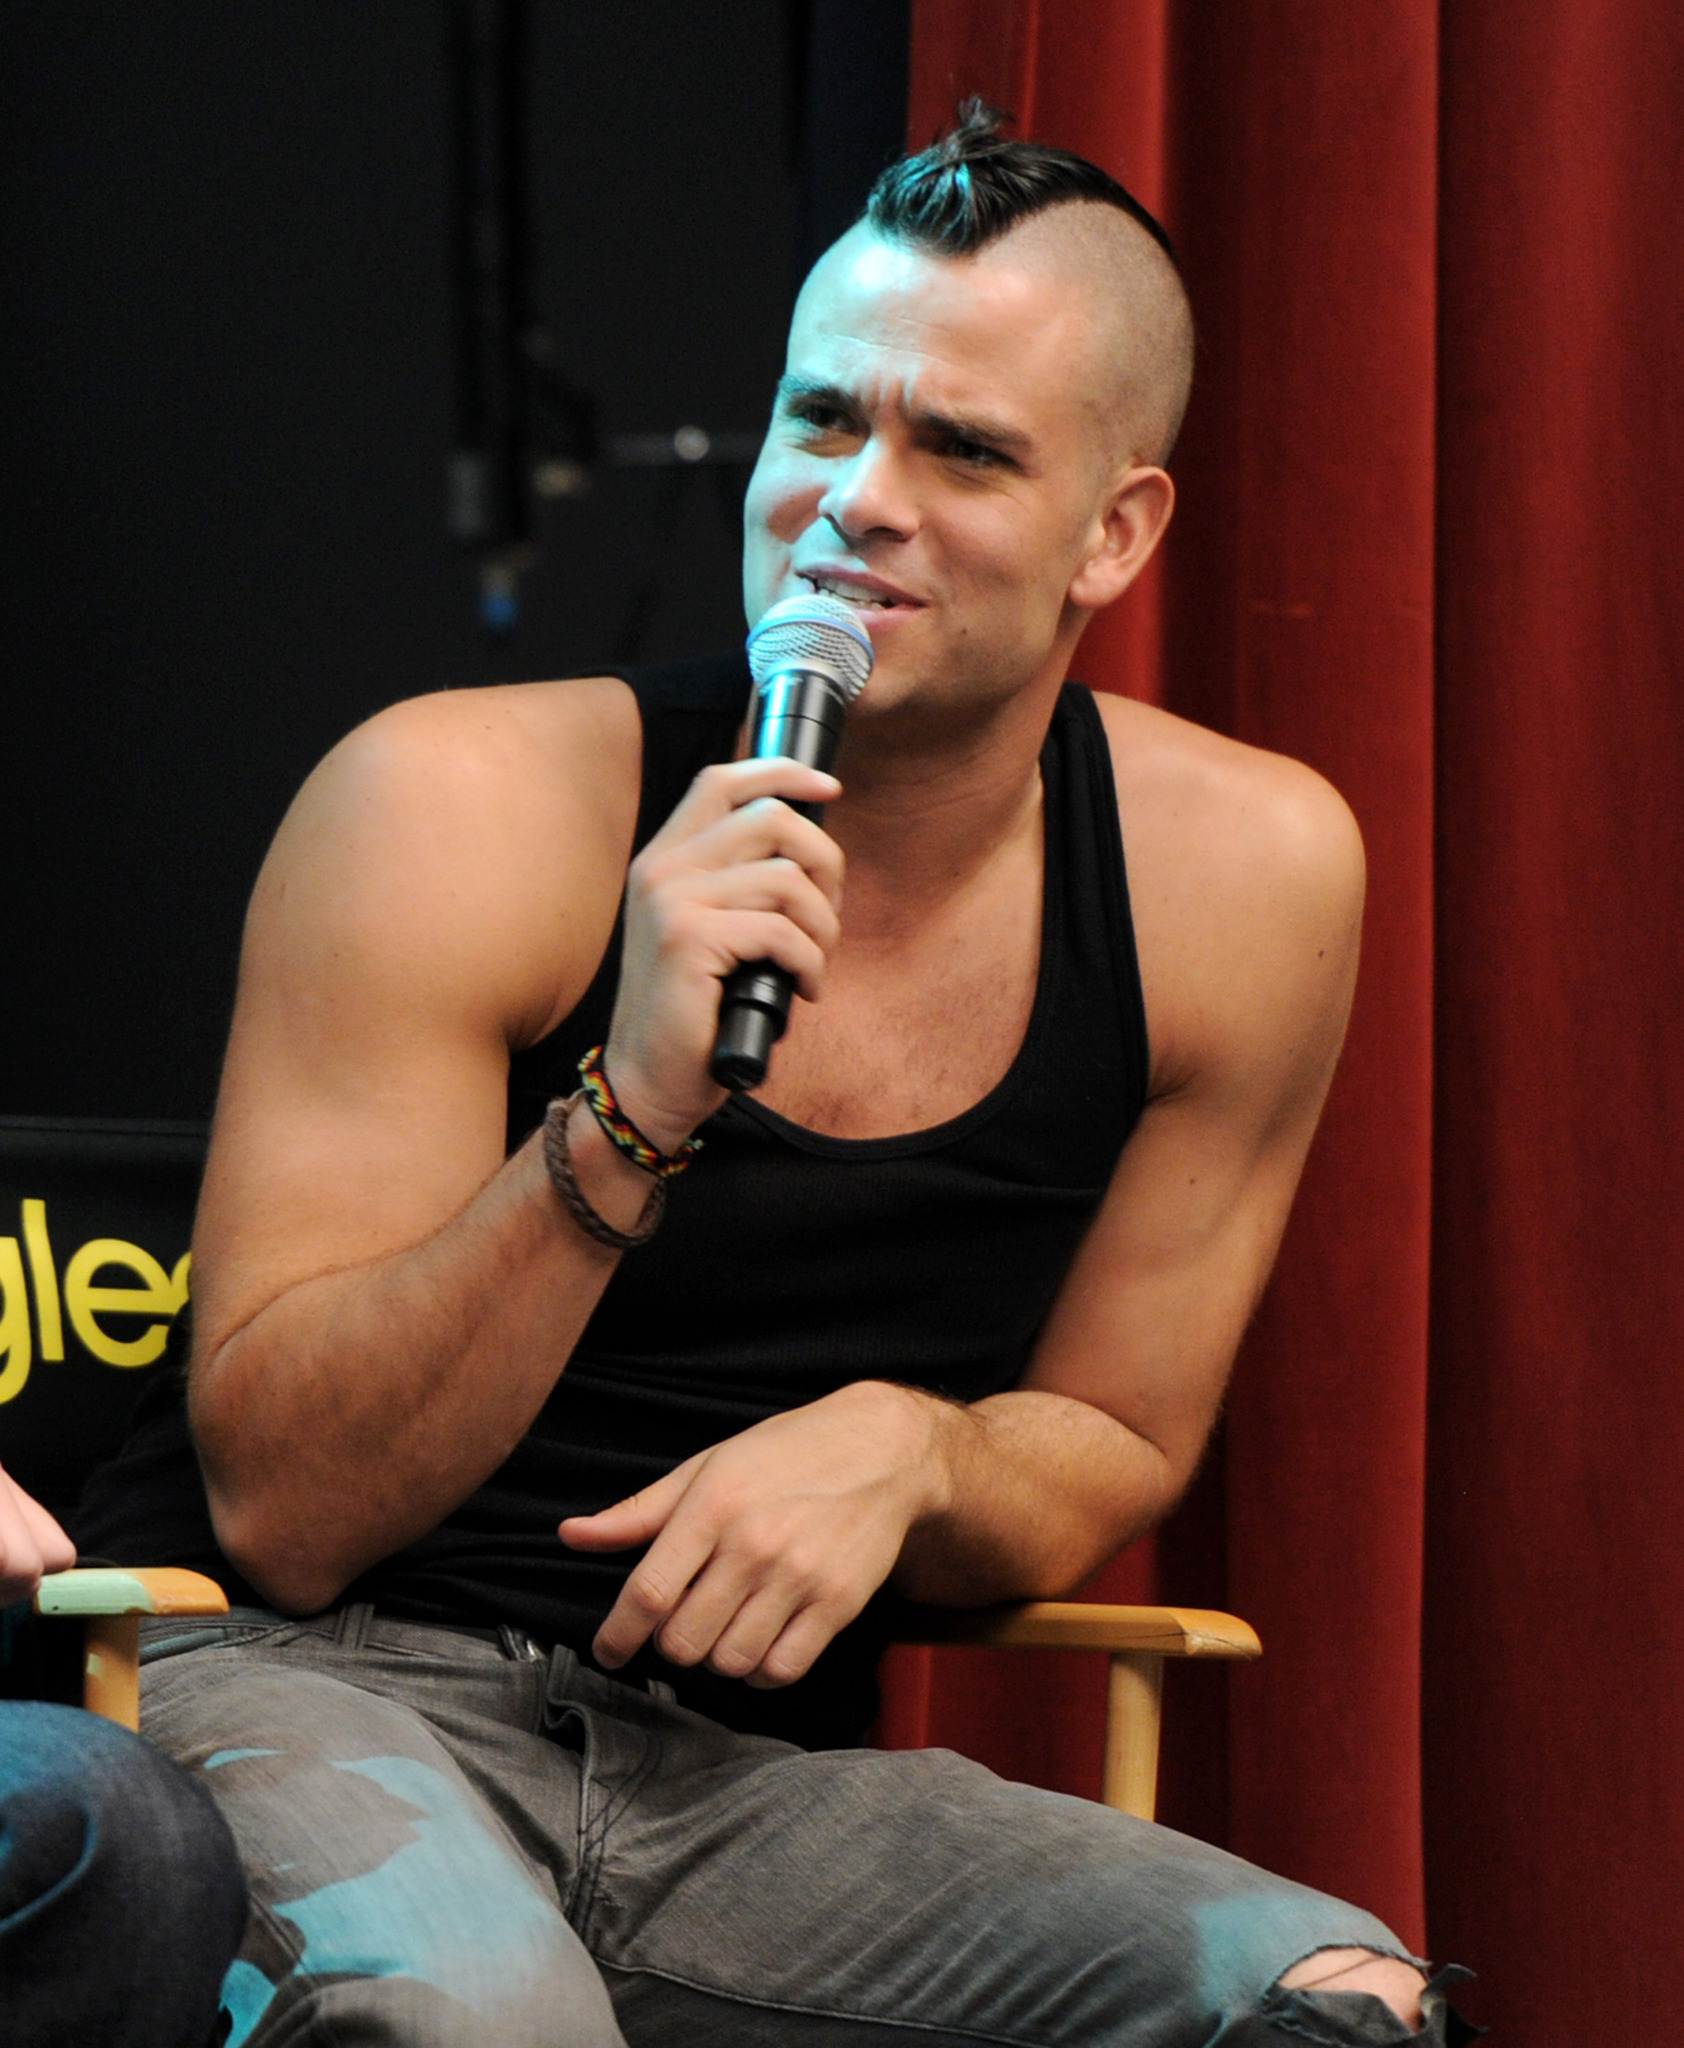 Mark Salling at event of Glee (2009)